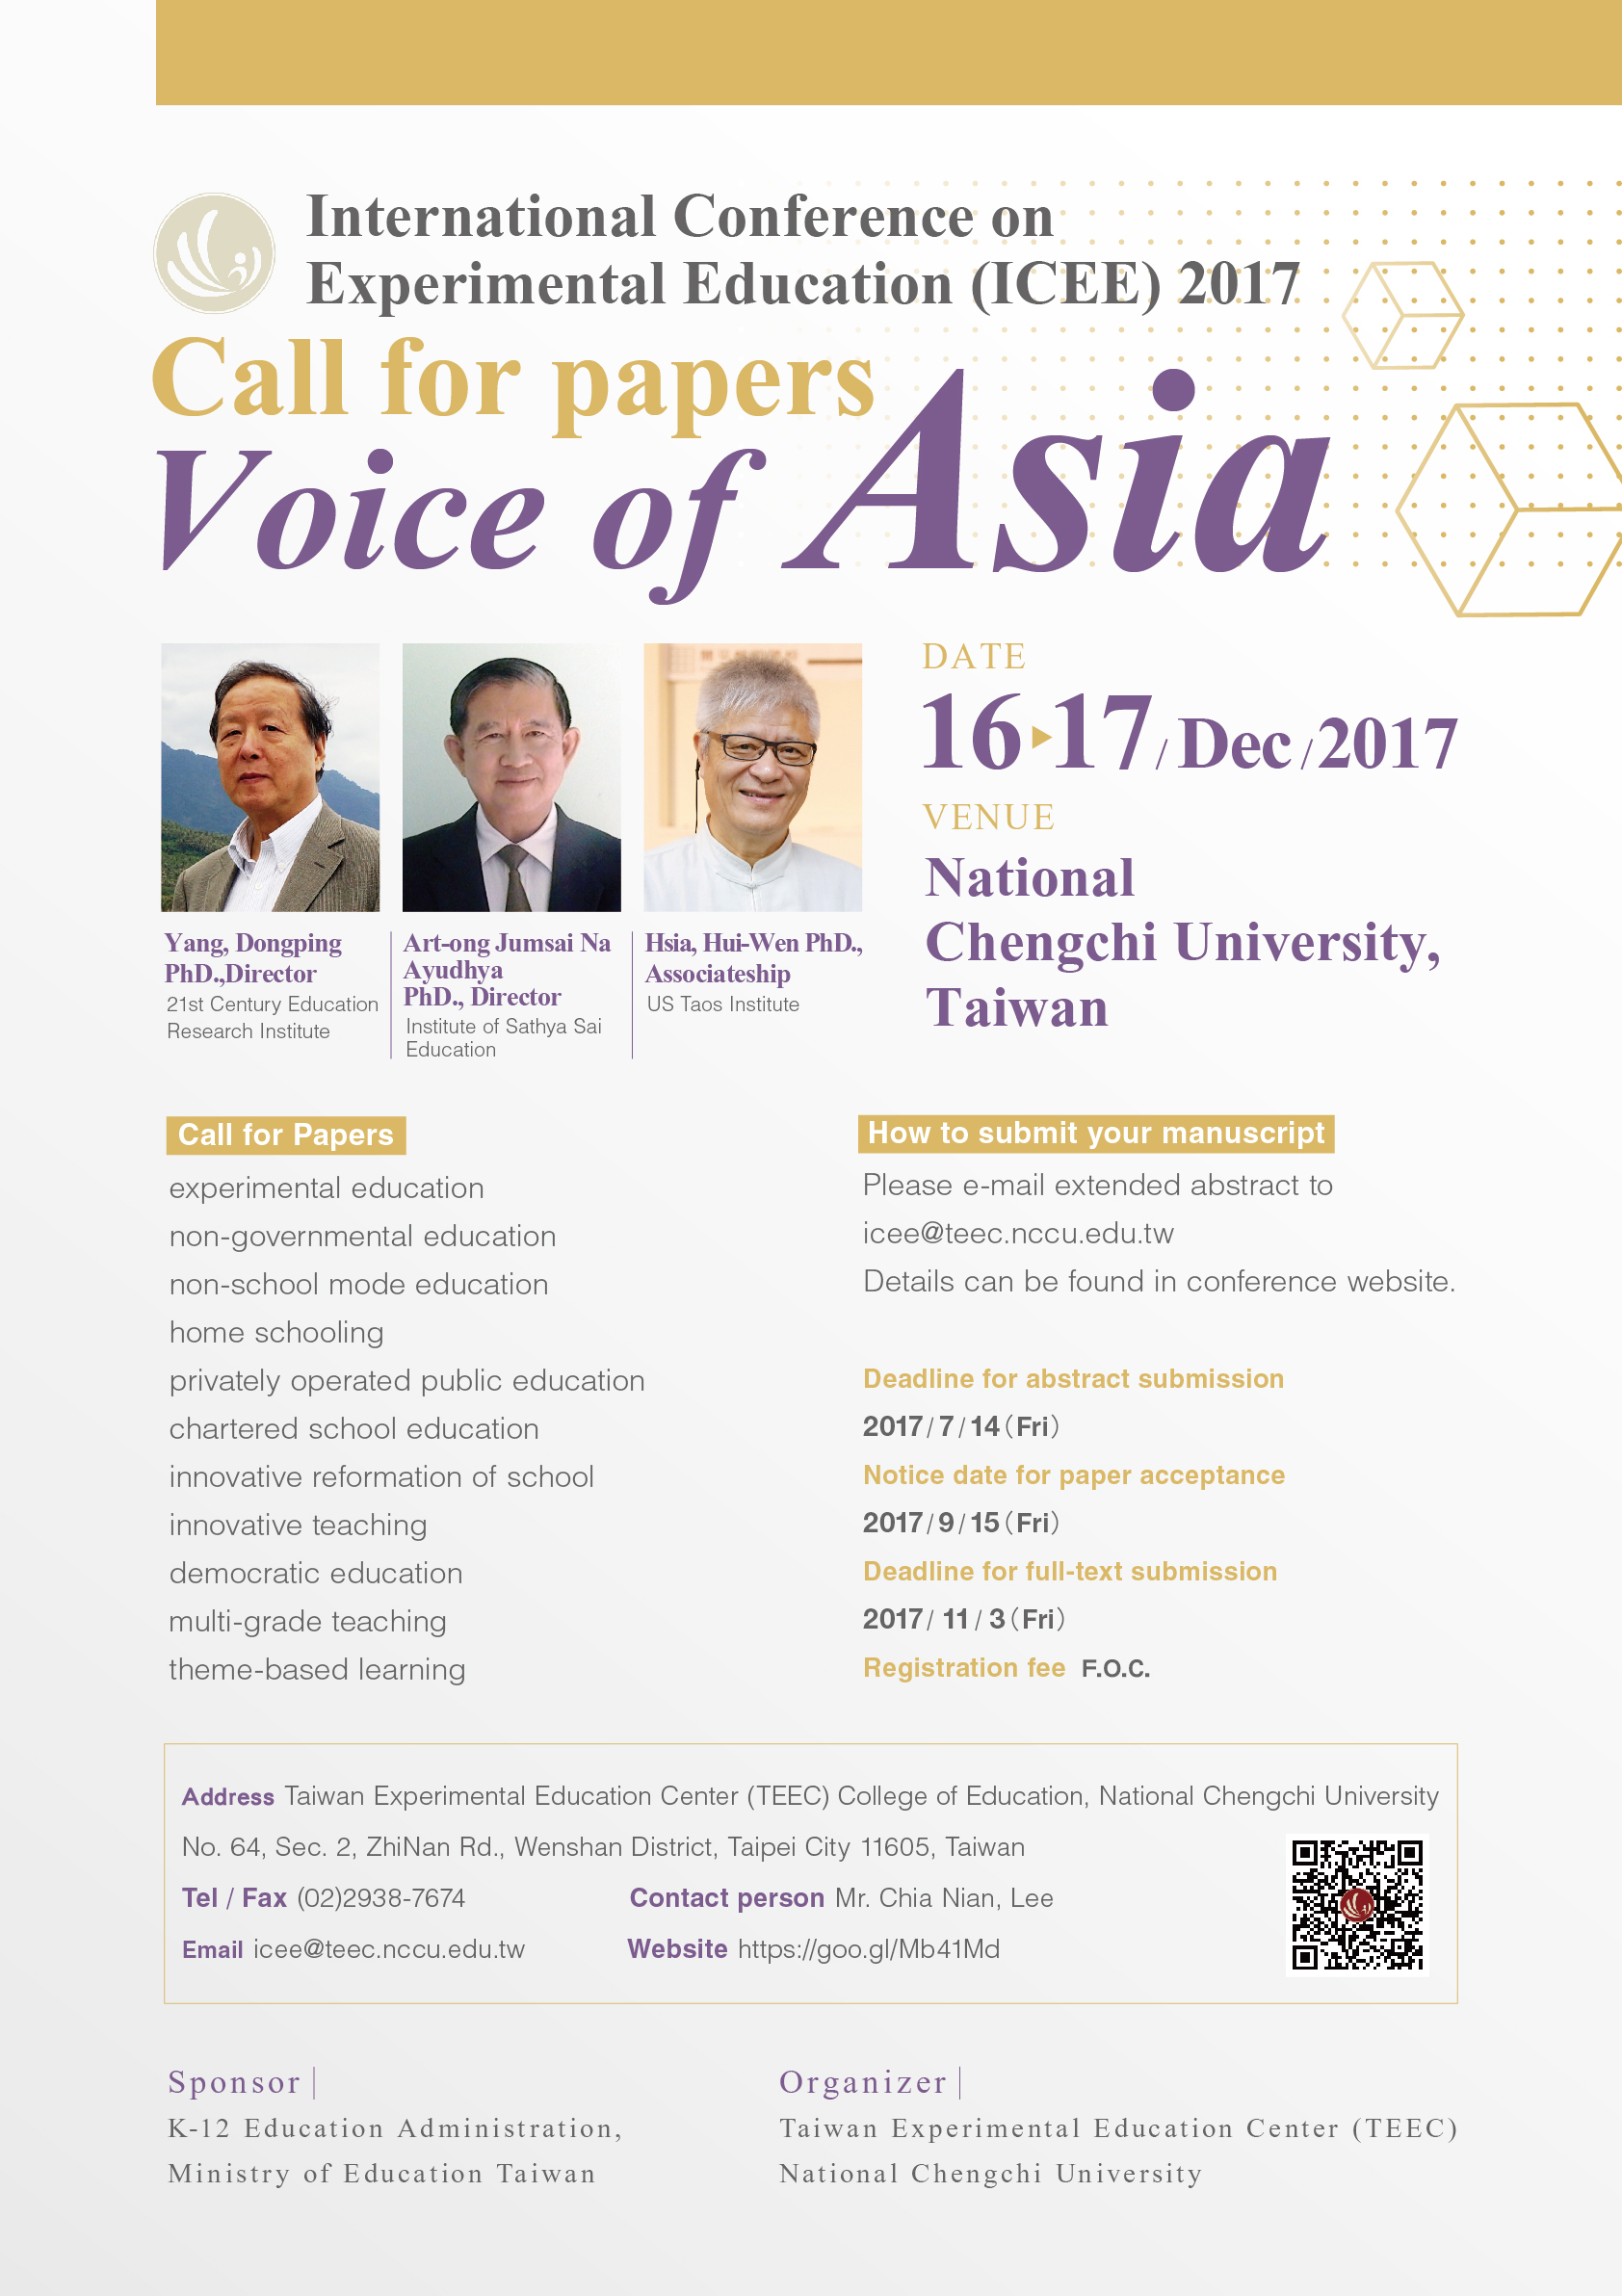 International Conference on Experimental Education (ICEE) 2017
 
Theme: Voice of Asia
 
Sponsor: K-12 Education Administration, Ministry of Education, Taiwan
Organizer: Taiwan Experimental Education Center
Date: 16-17 December 2017
Venue: National Chengchi University, Taipei, Taiwan

Call for Papers
This conference invites papers that explore and interrogate issues related to education. We welcome a diverse array of approaches and methodologies. Possible topics include but are not limited to the following